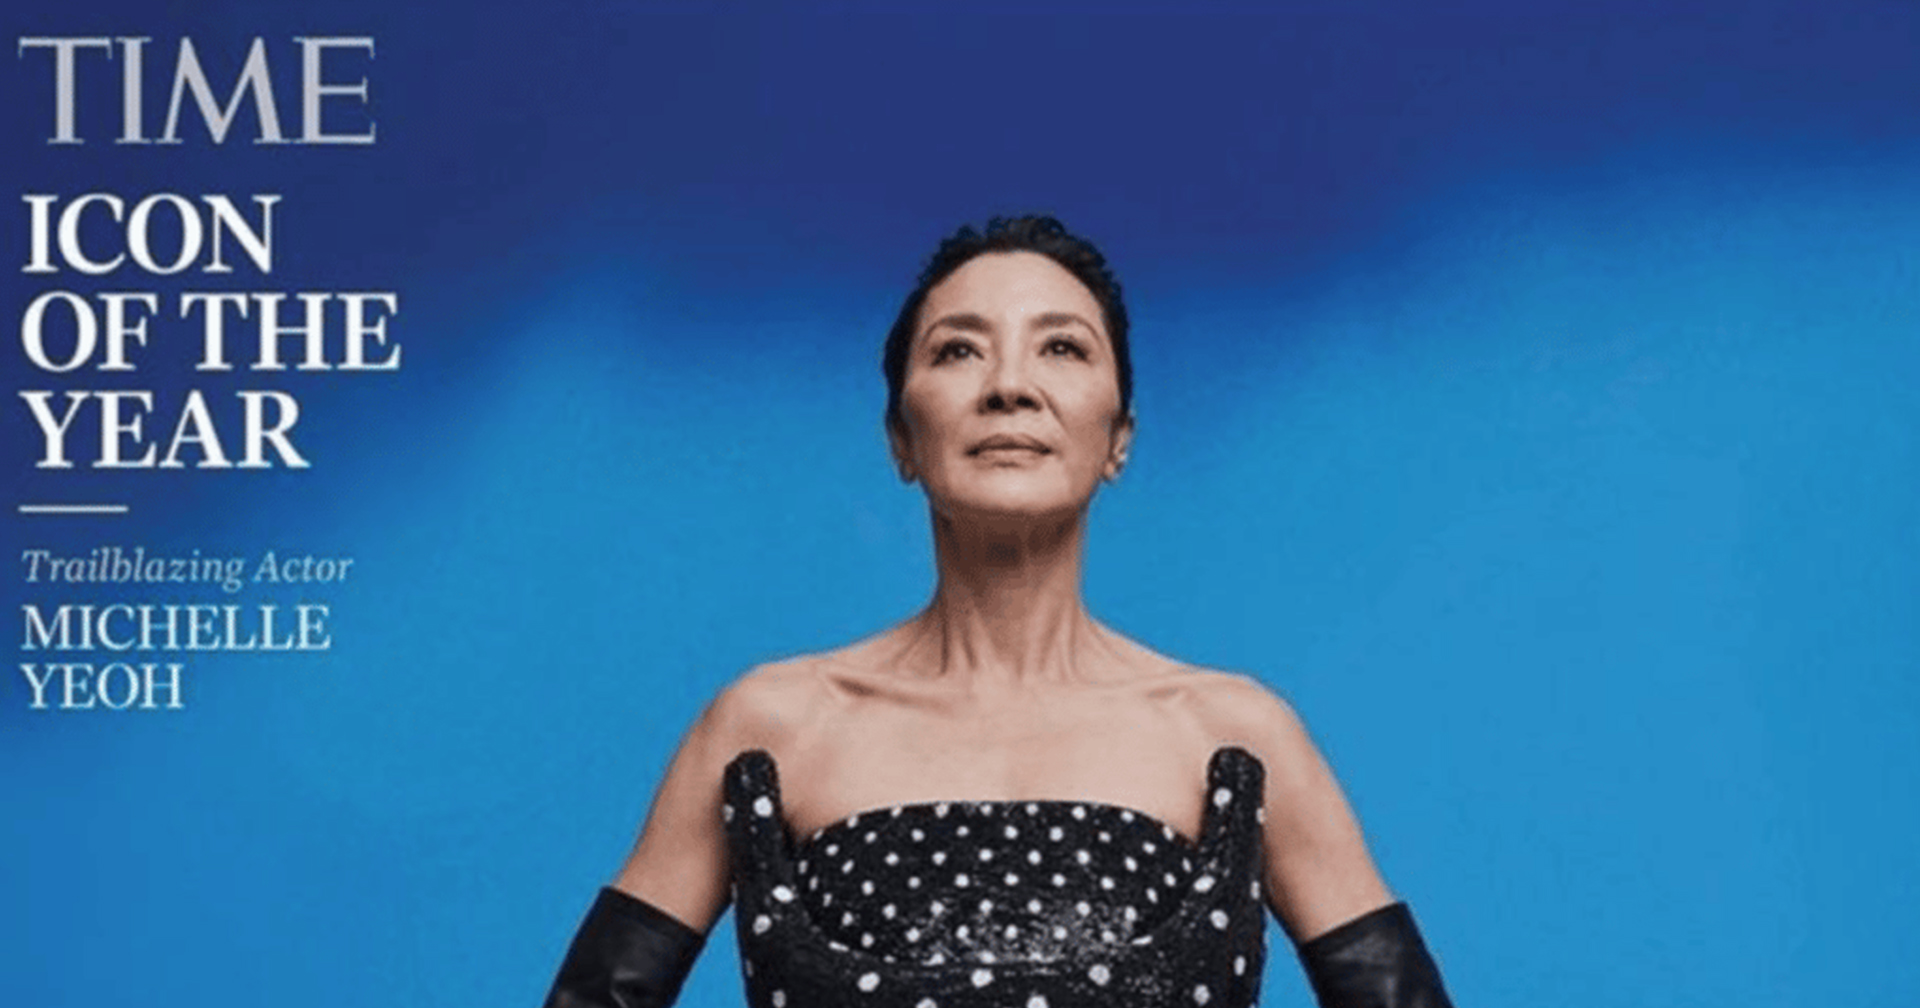 TIME ยกให้ Michelle Yeoh เป็น ‘Icon of the Year 2022’